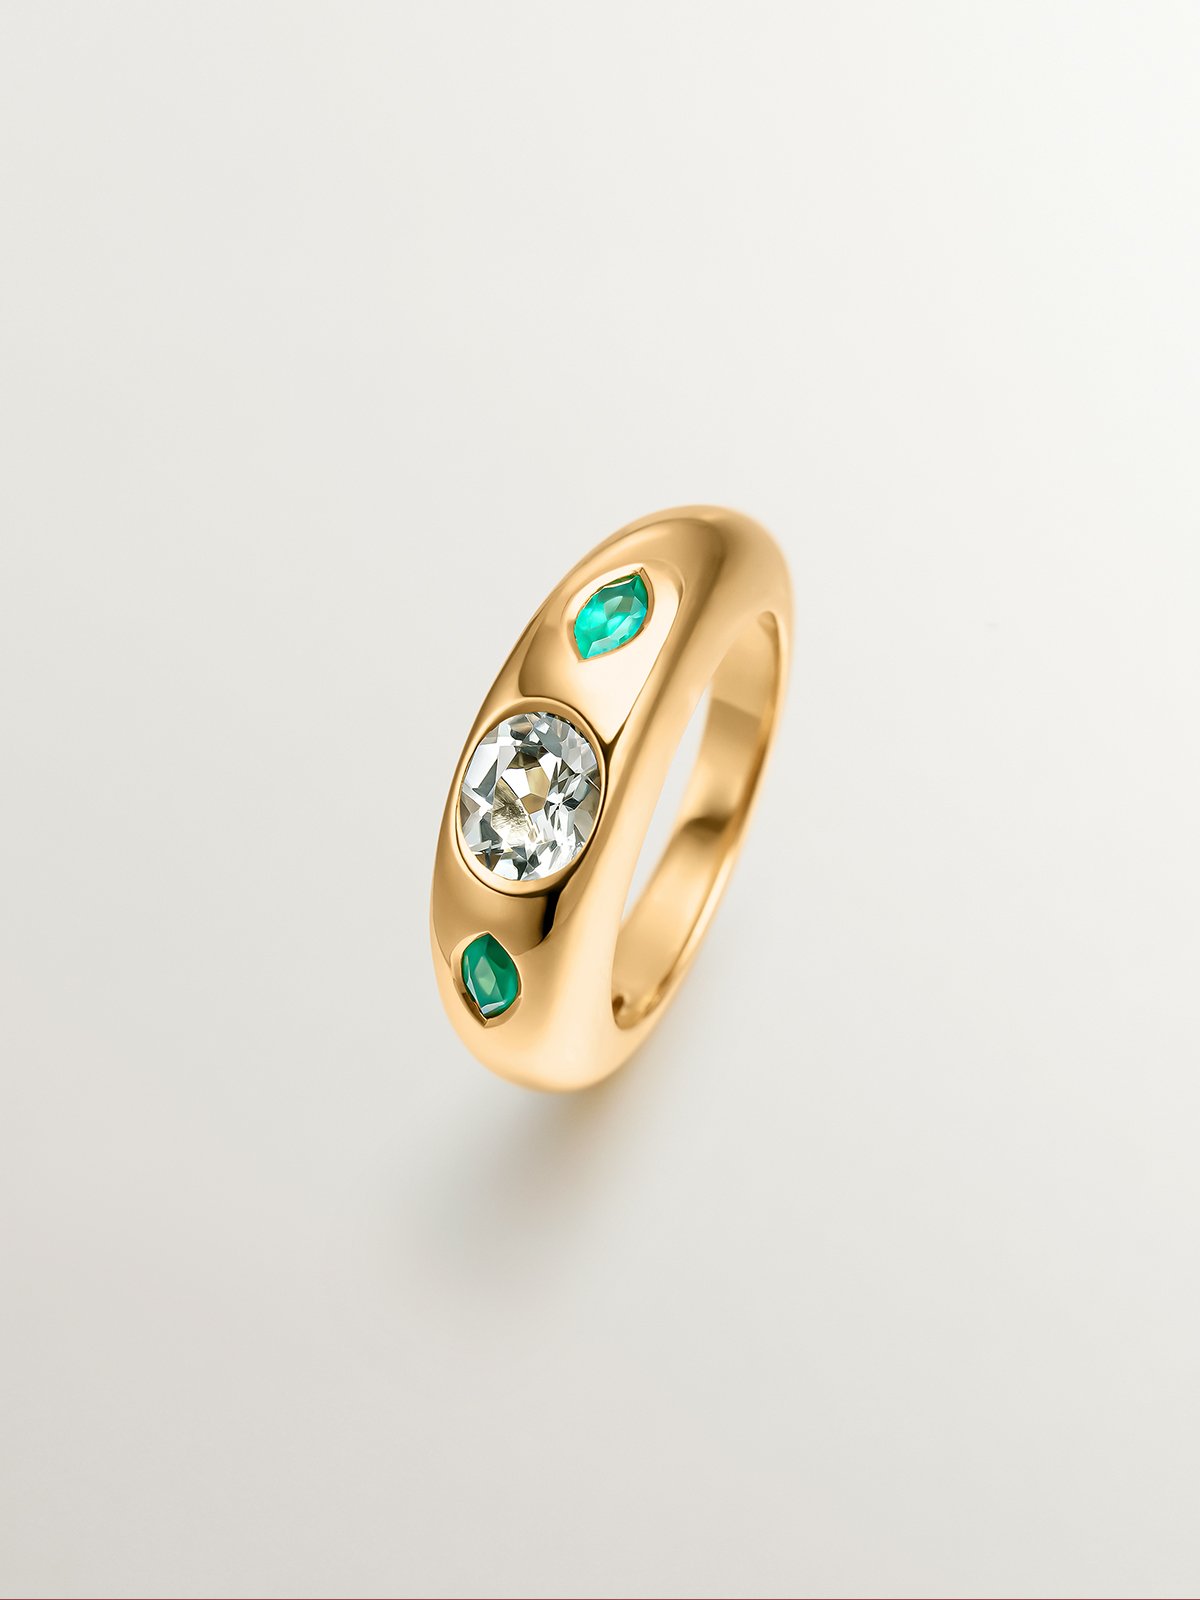 18K yellow gold plated 925 silver ring with central green quartz and green onyx